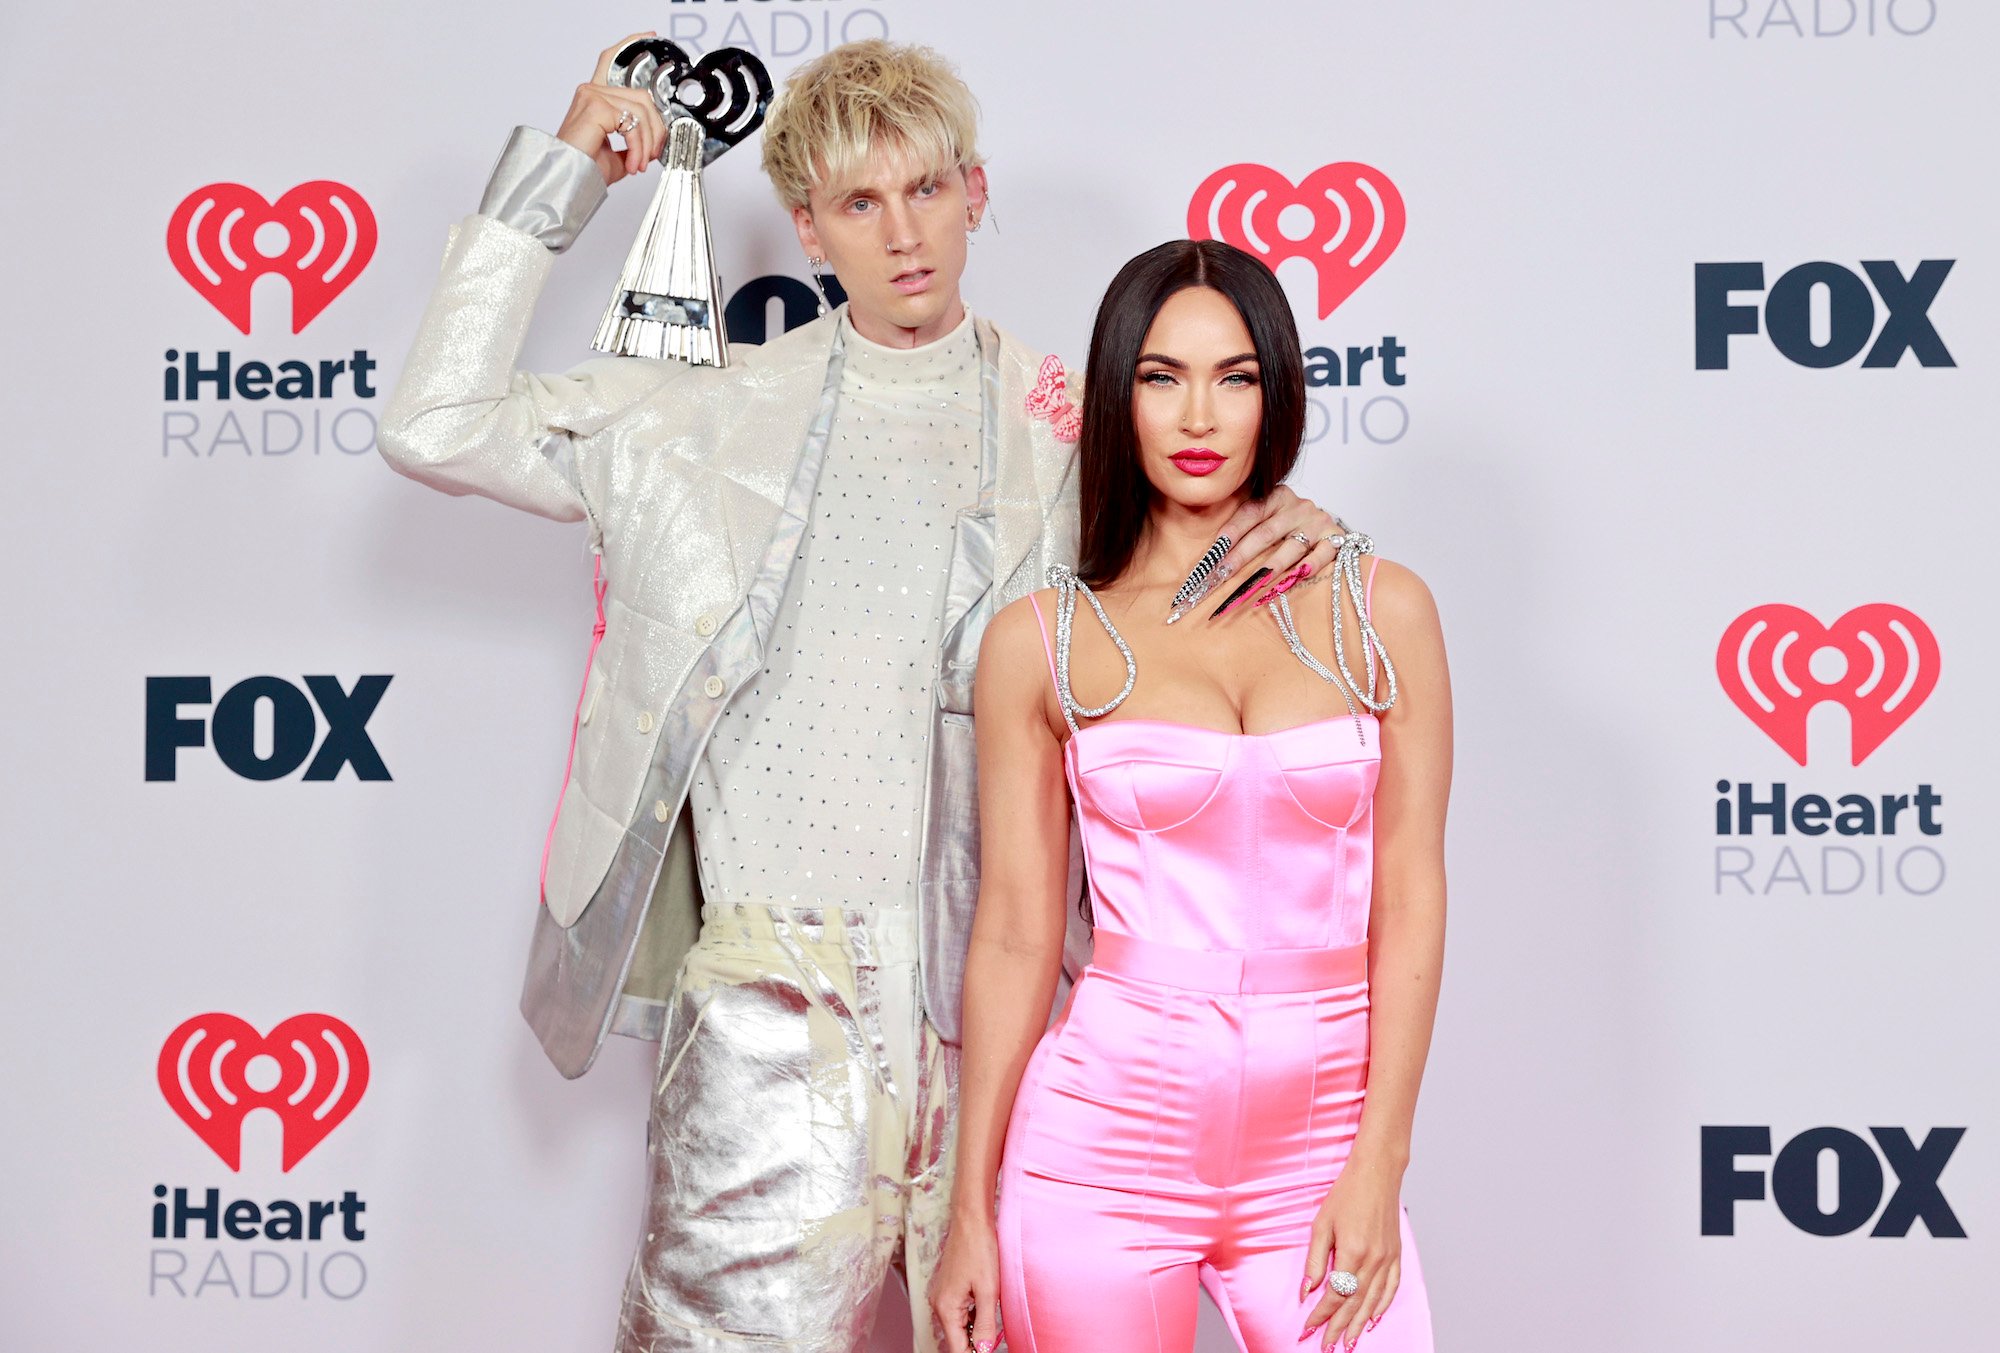 Machine Gun Kelly and Megan Fox posing together on the red carpet at the 2021 iHeartRadio Music Awards